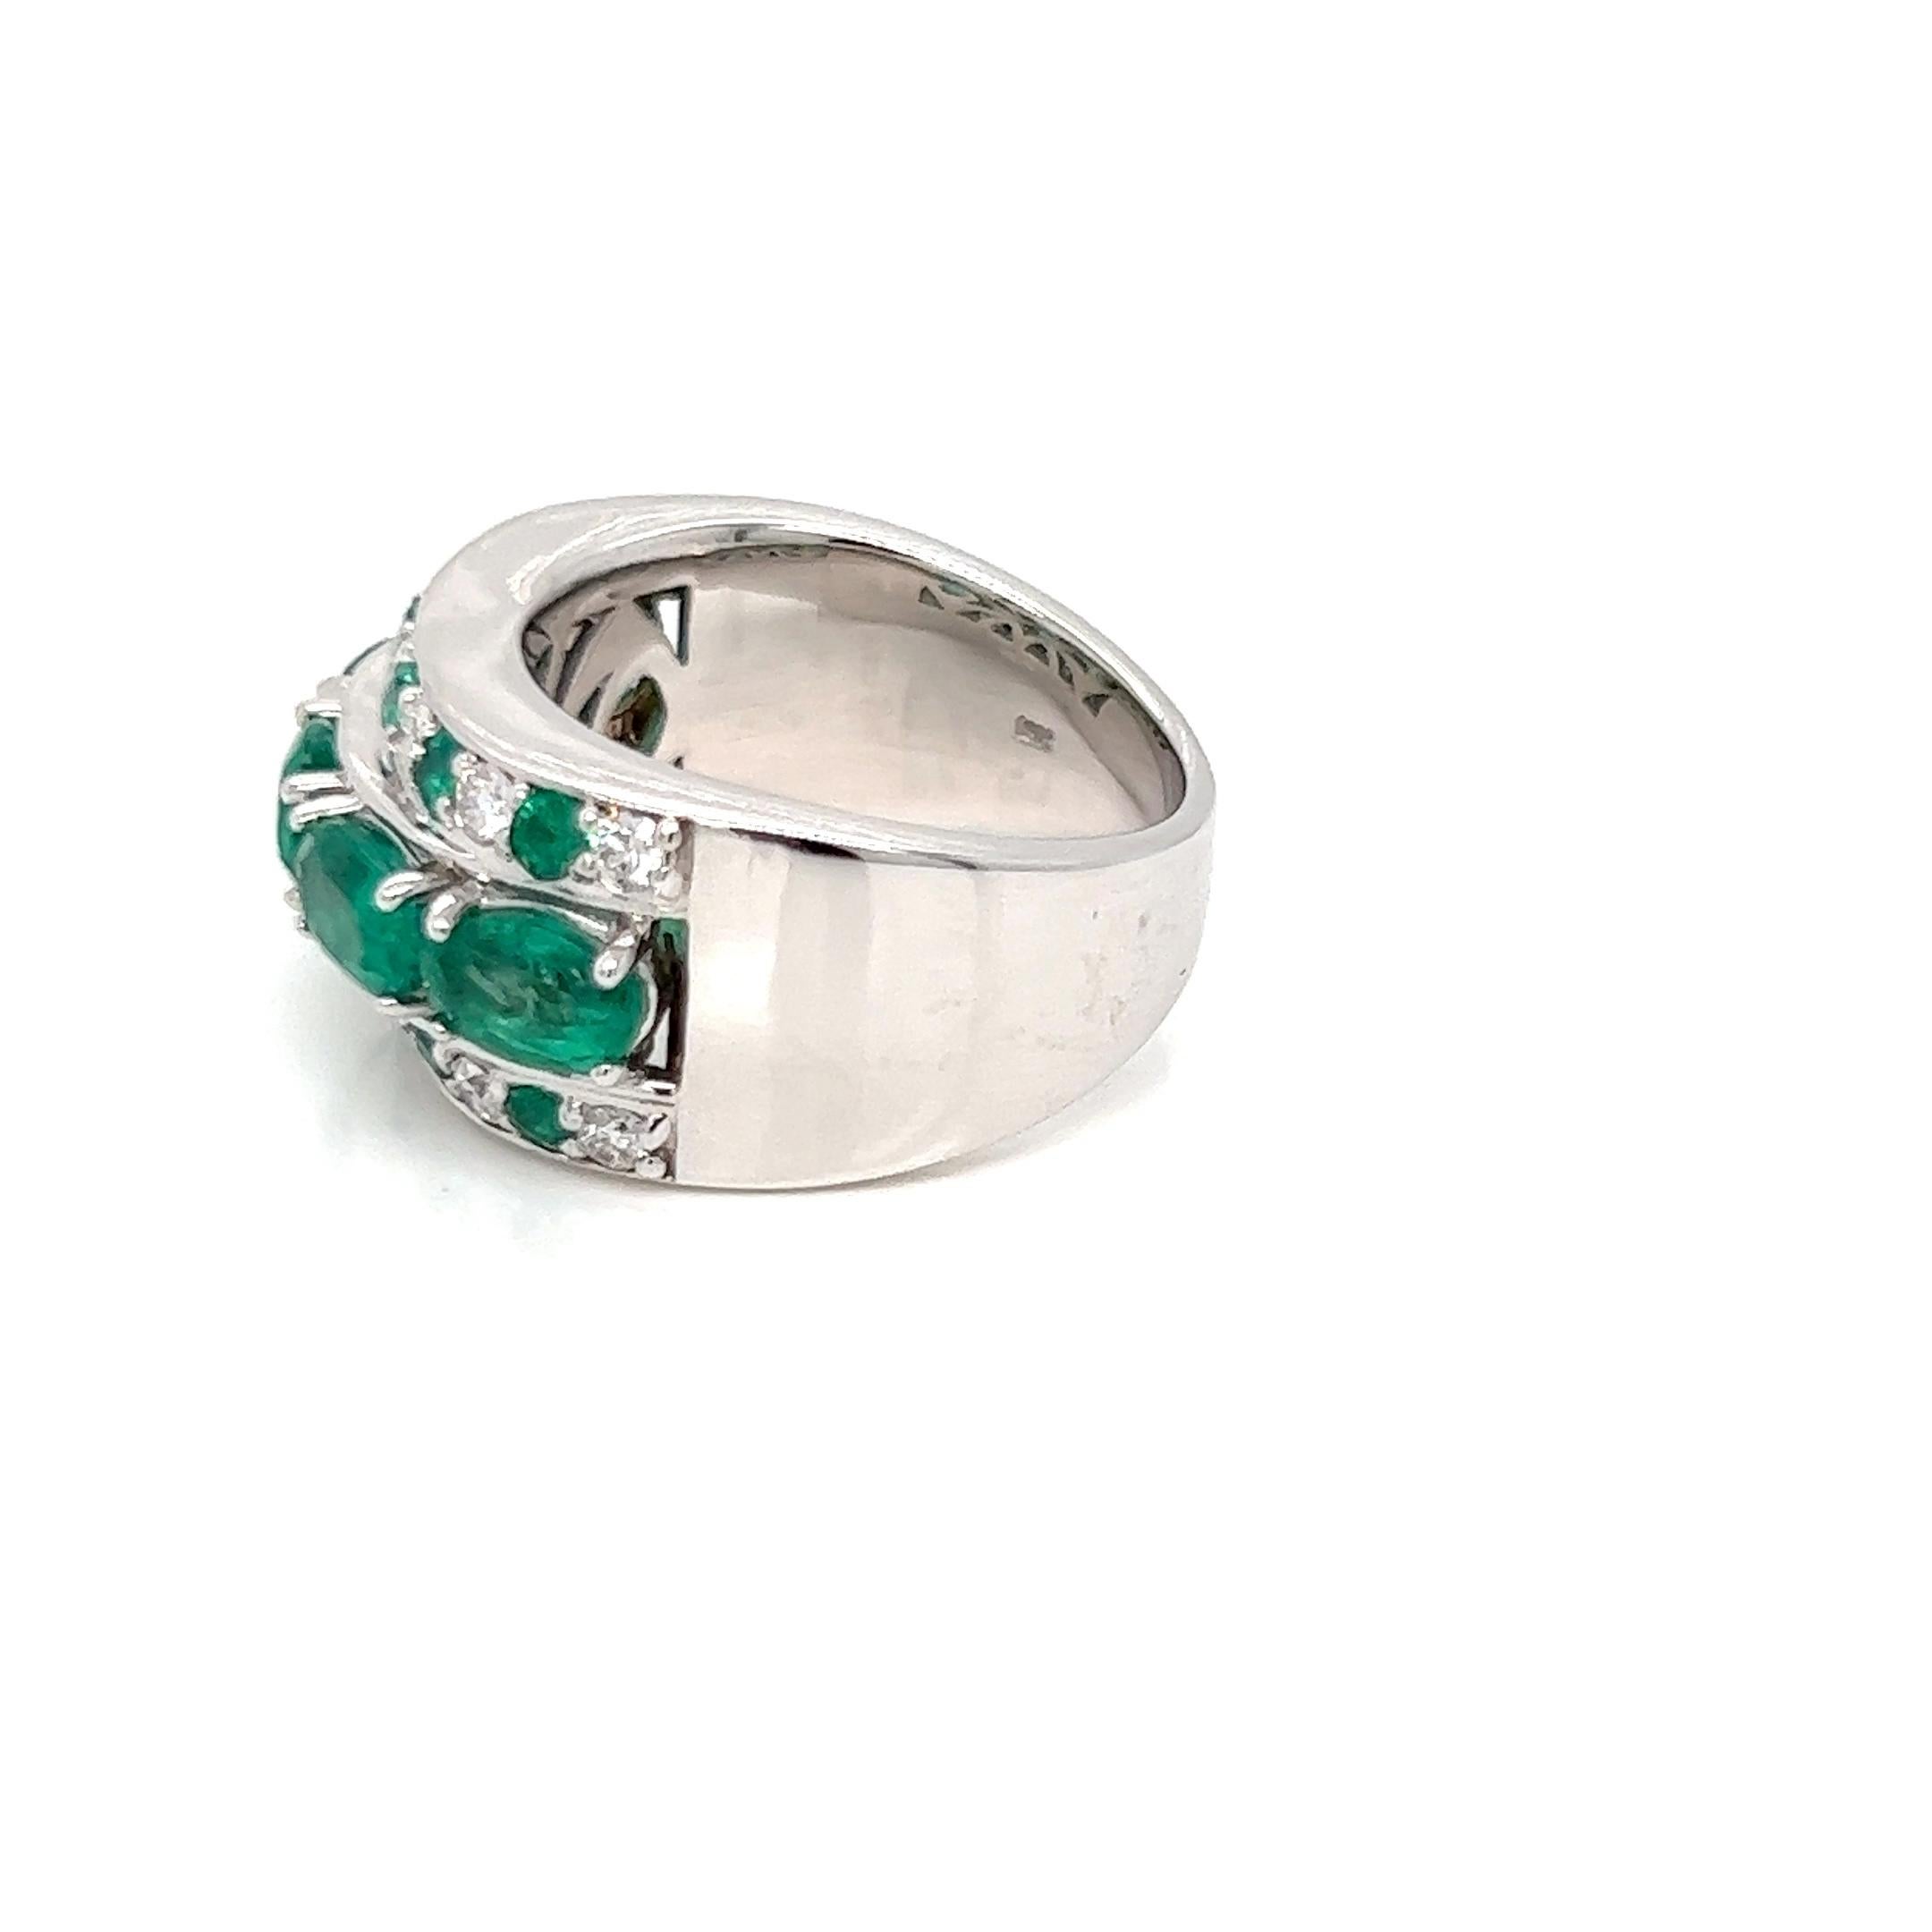 This ring is not like any other emerald and diamond ring you find. It is designed very carefully and meticously in the heart of New York City. This ring consists of Zambian emeralds known for their bluish green hue and tone which gives it a cool